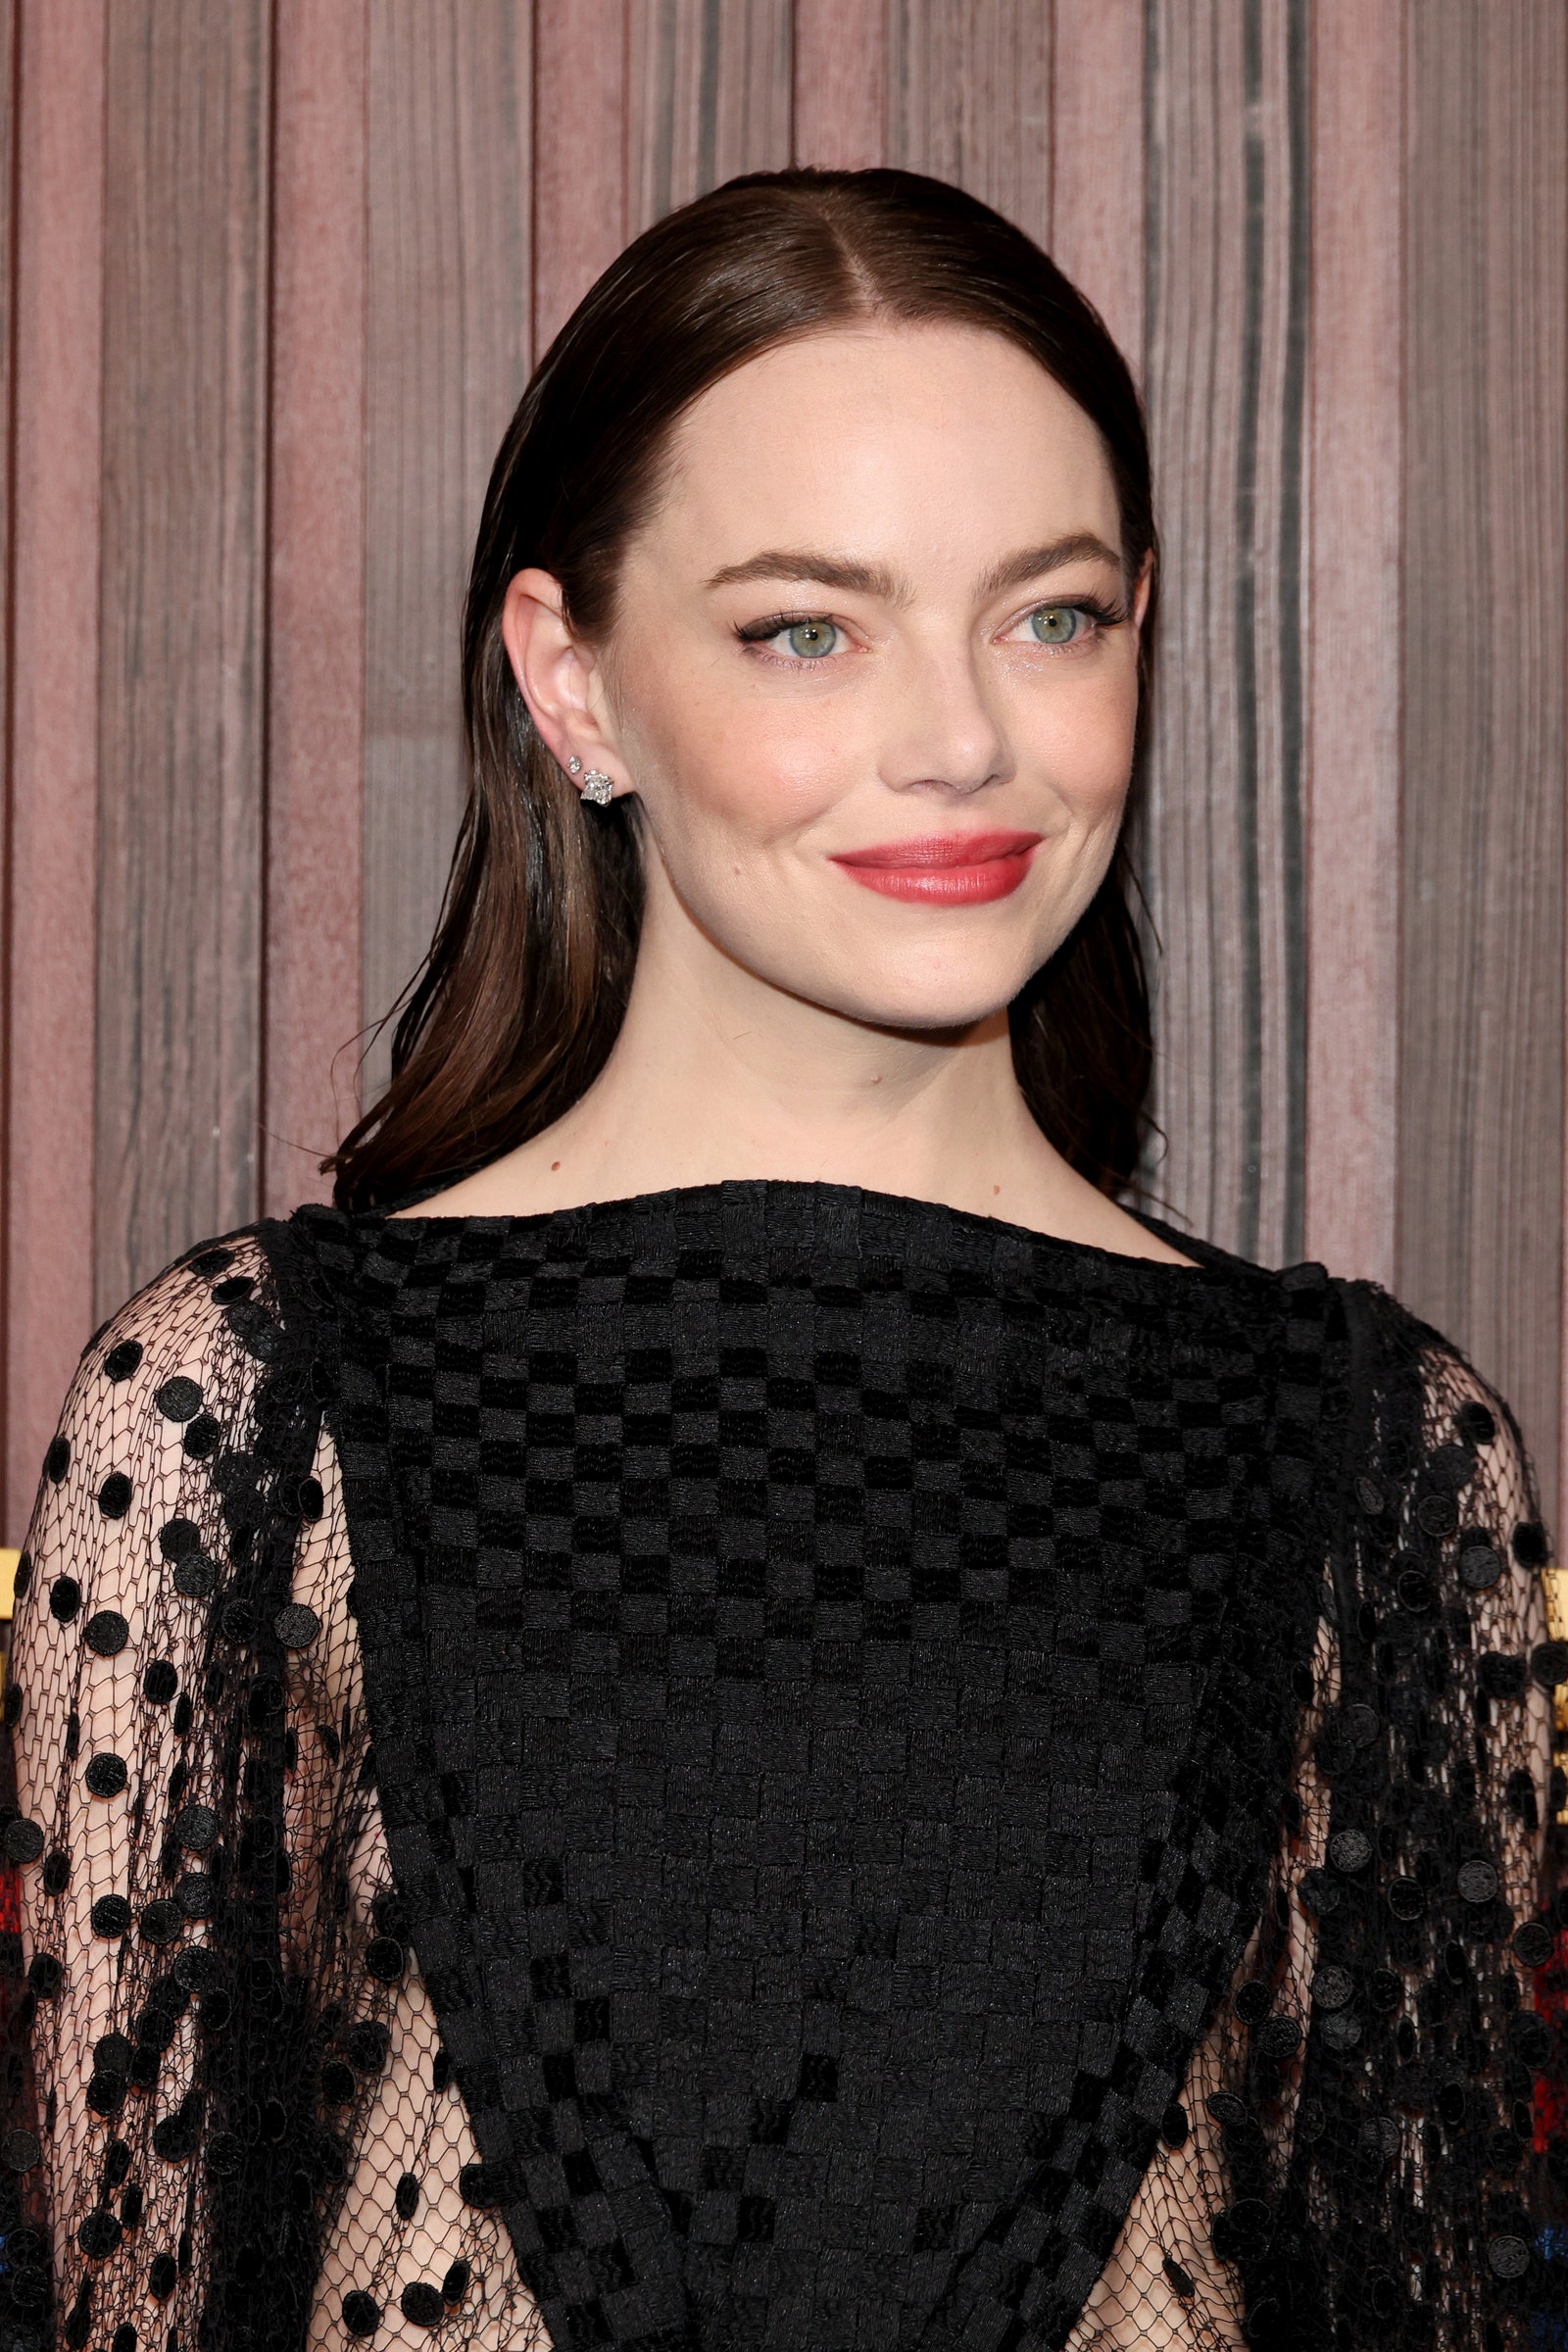 Emma Stone poses at a premiere in a black dress. Her hair is a dark brown with red undertones.